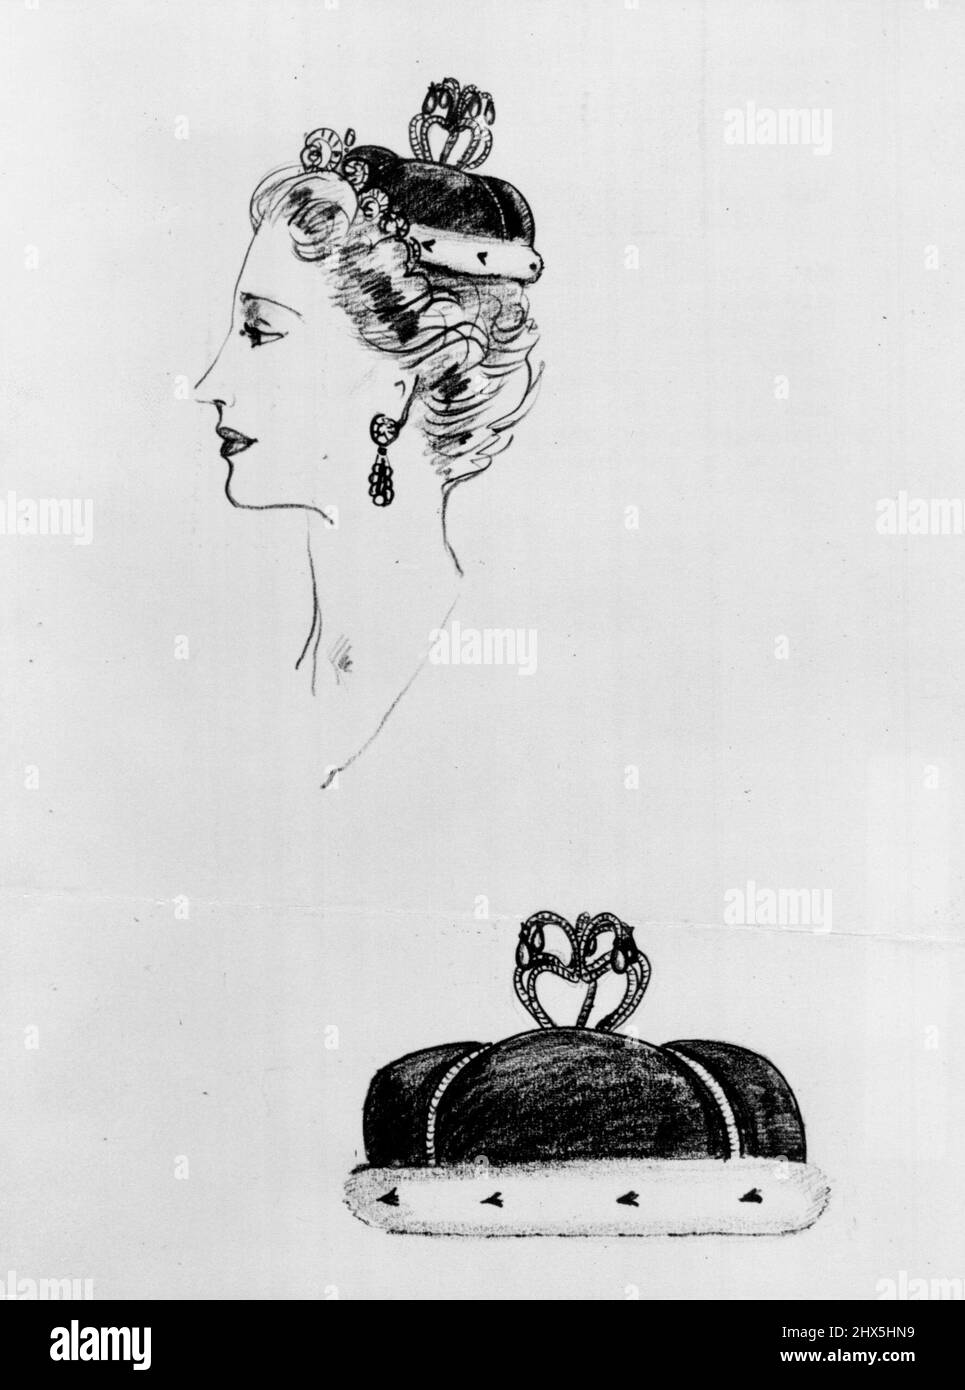 Hartnell Cap of States Is Coronation Alternative For Peeresses -- Sketch of the approved Norman Hartnell design for a Cap of State for Peeresses below the degree of Countess, who may wear it as an alternative to a coronet. The London Gasette to-night (Tuesday) states Viscountesses and Baronesses who are not in possession of Coronets may wear as an alternative a crimson velvet cap enriched with narrow gold braid and bordered with a narrow strip of white fur. The cap should be made to fit the crown of the head and should have a gold or gold coloured tassel or other similar decoration which may Stock Photo